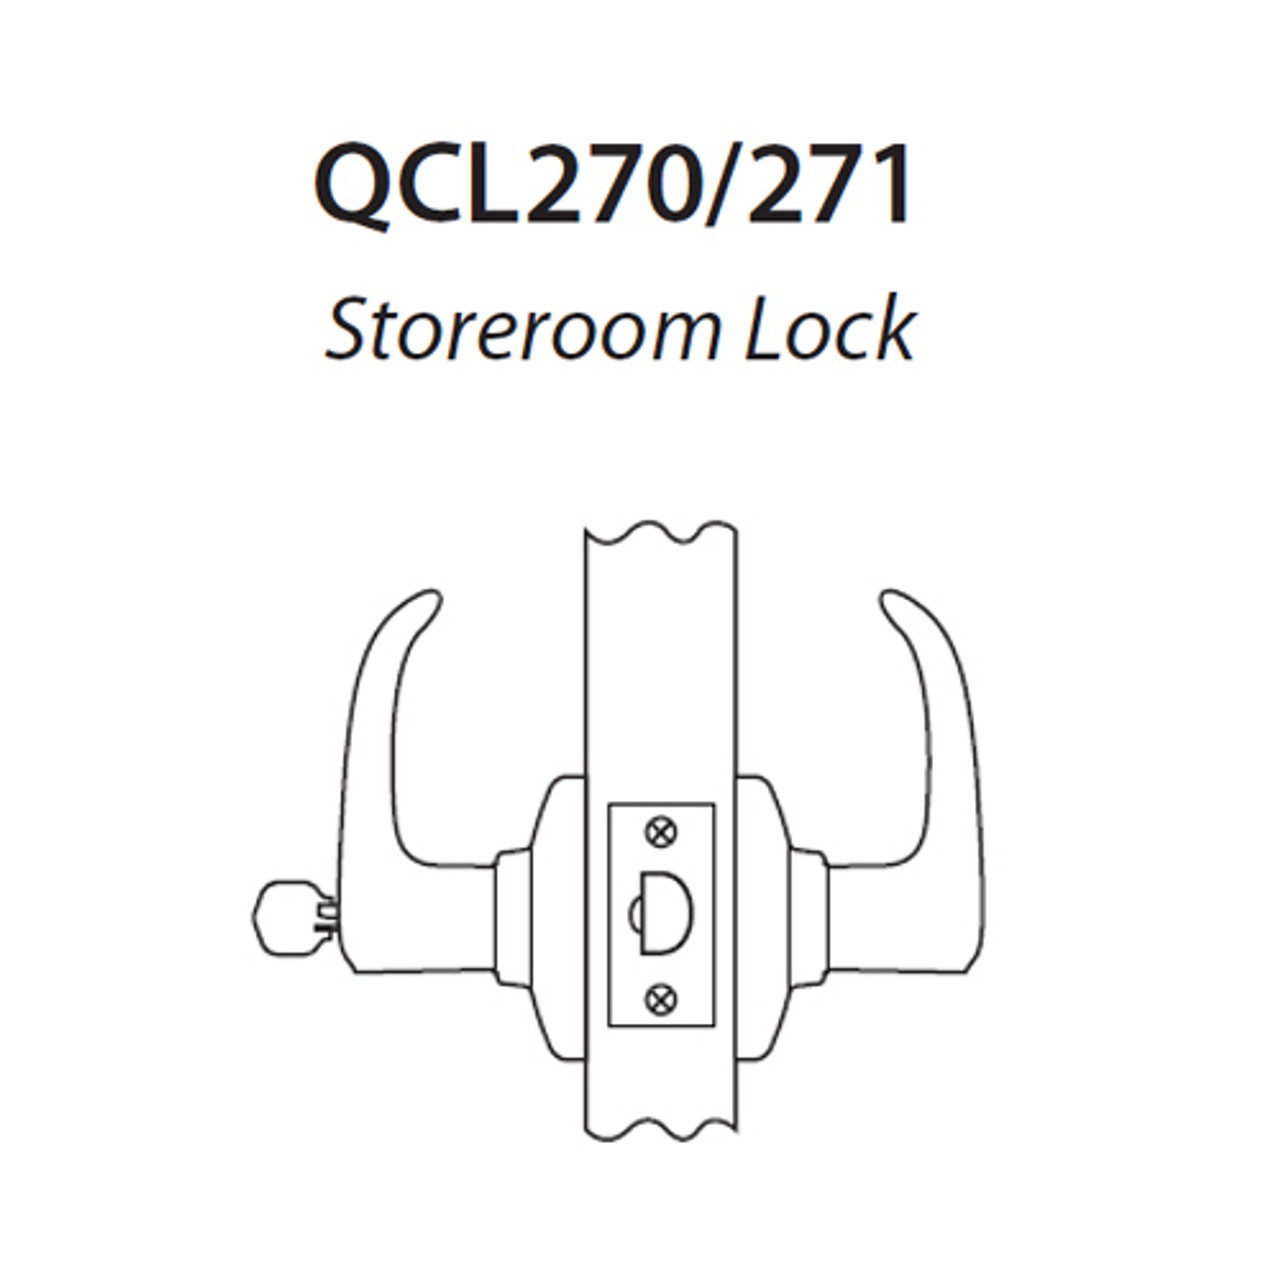 QCL271A613FS4FLSBF Stanley QCL200 Series Ansi Strike Best "F" Storeroom Lock with Slate Lever Prepped with SFIC Core in Oil Rubbed Bronze